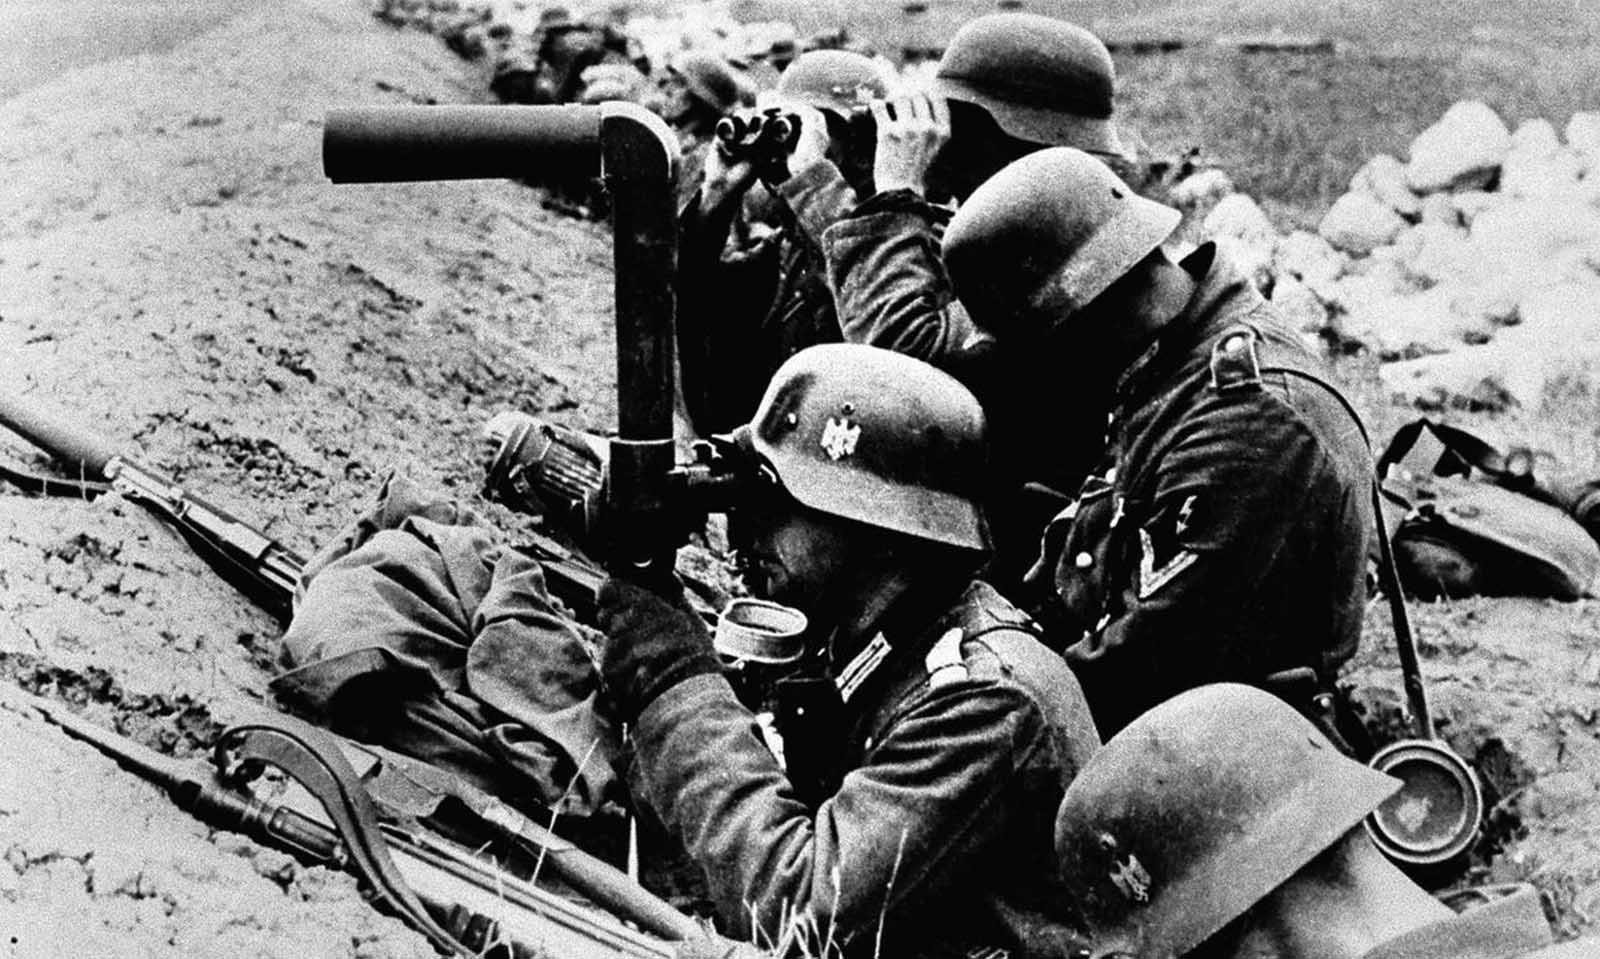  Operation Barbarossa In Rare Pictures 1941 Rare Historical Photos